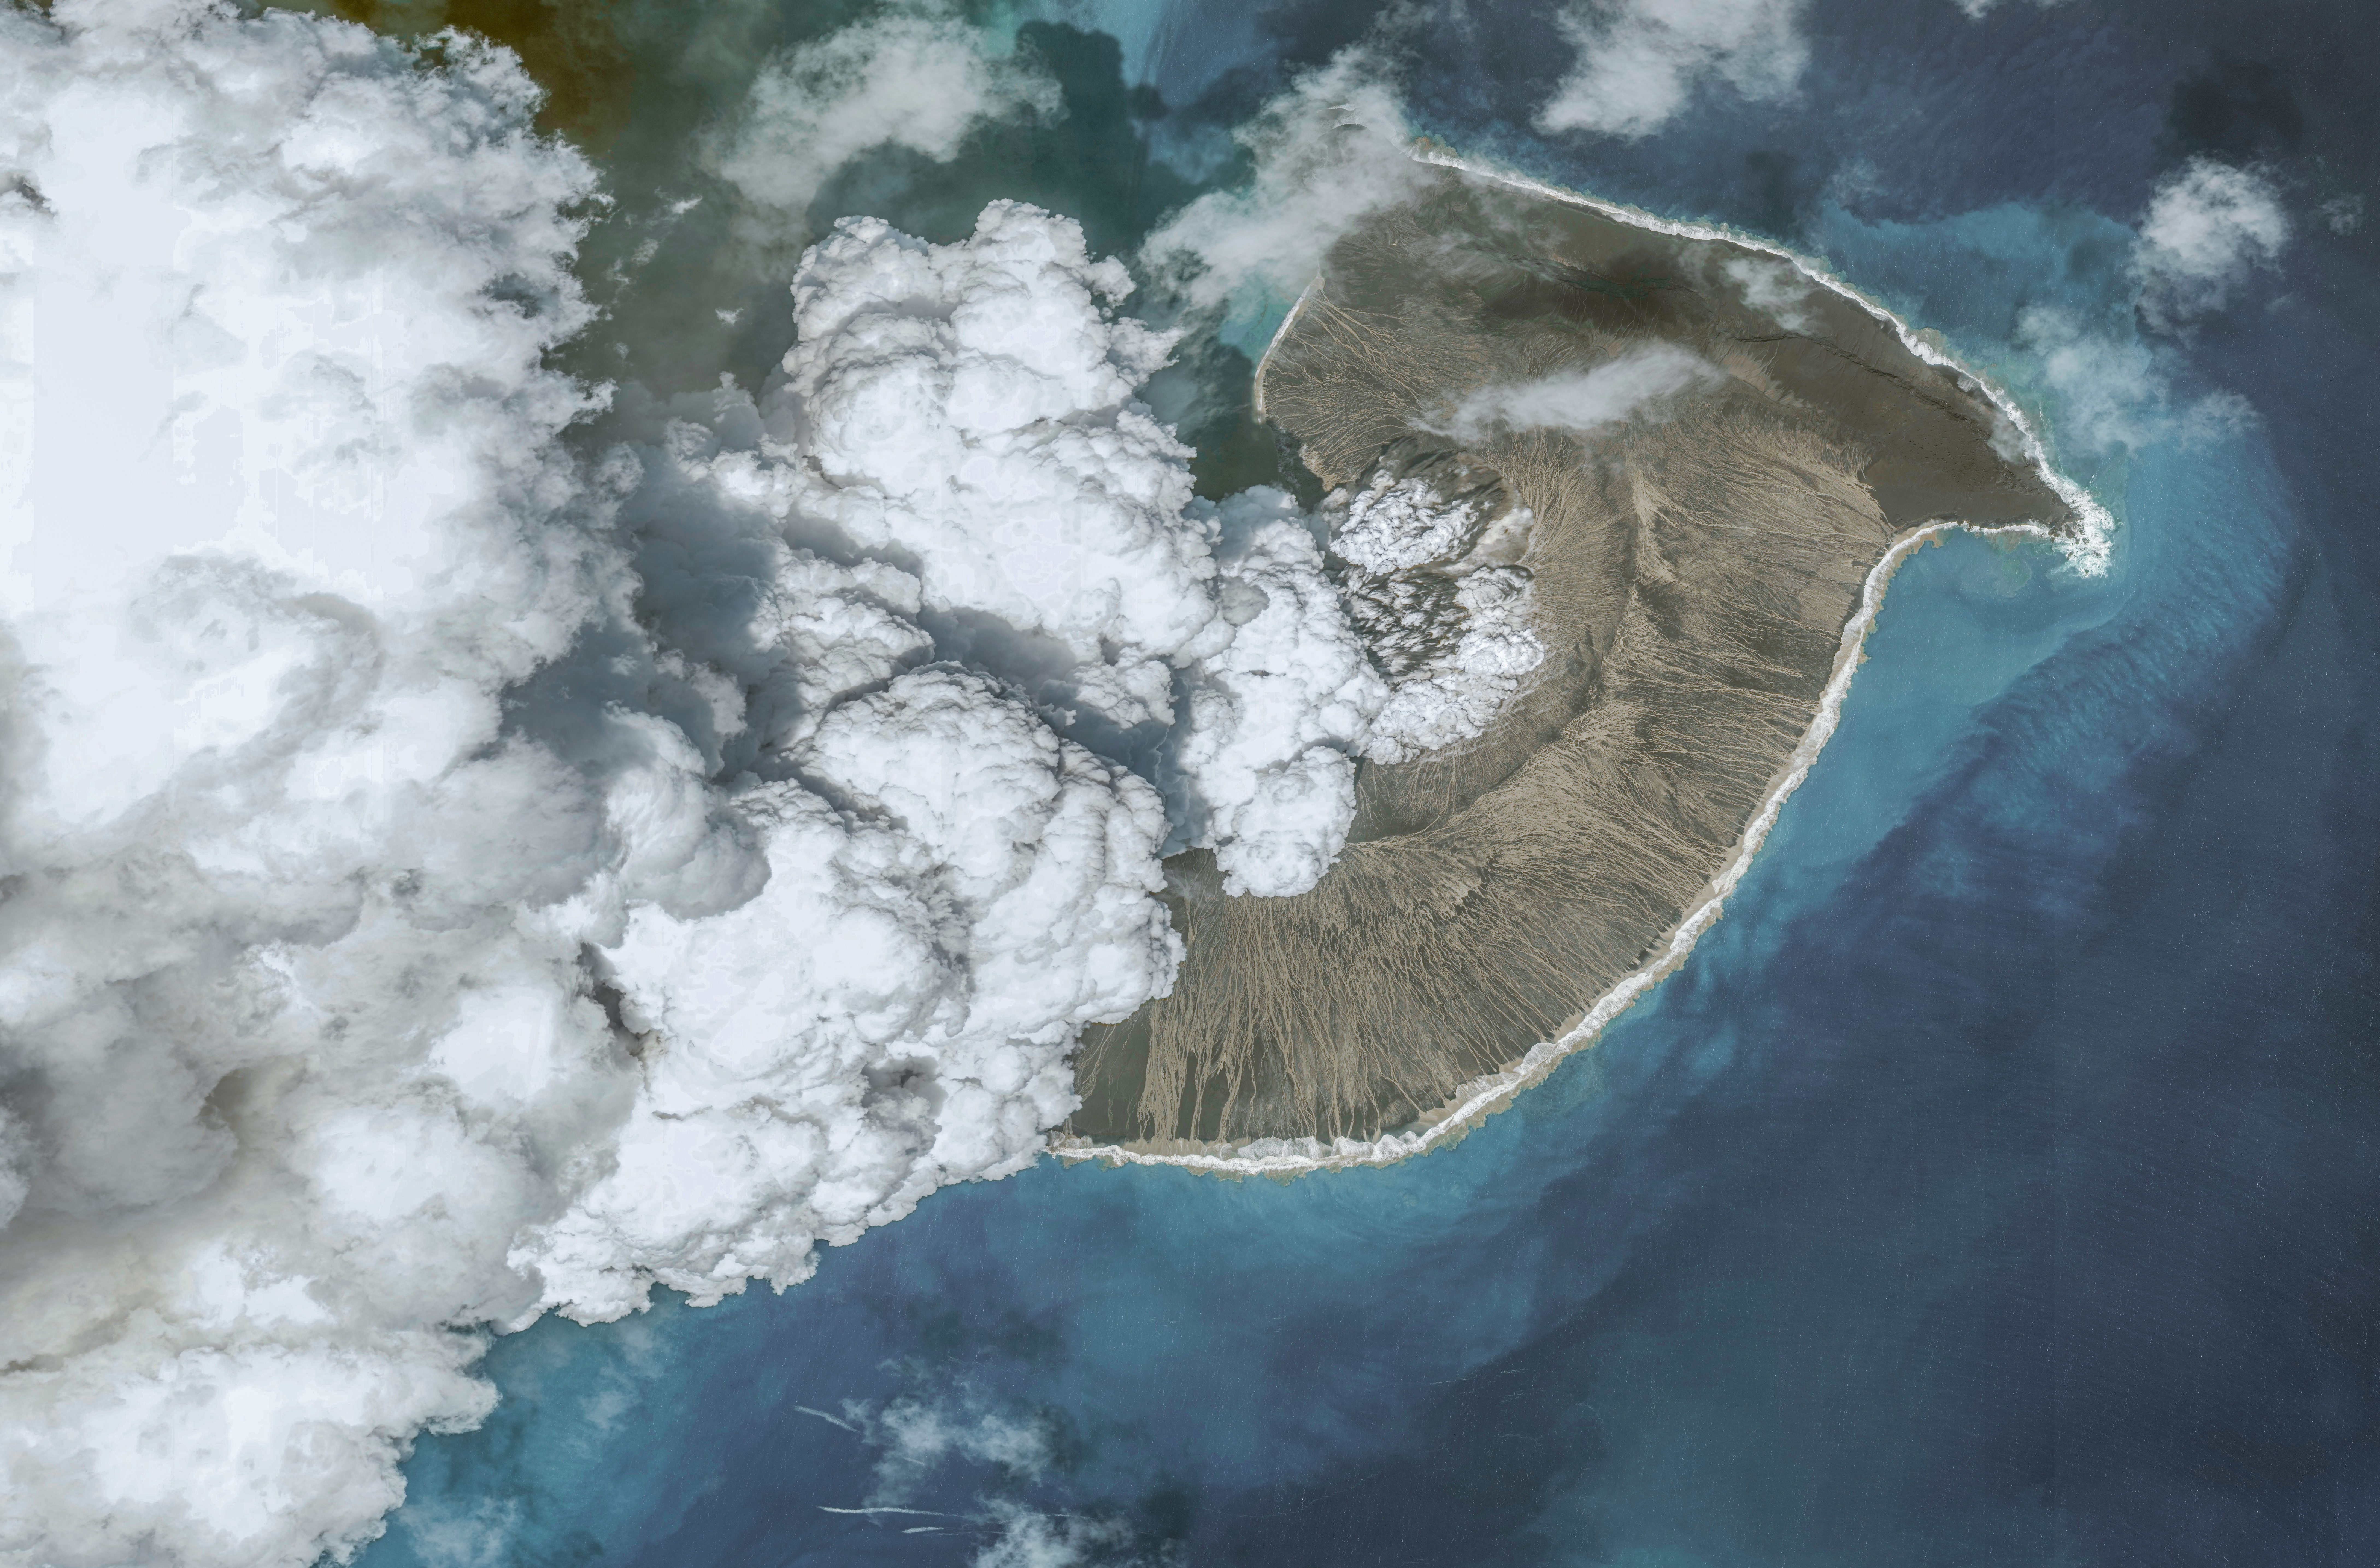 Tonga volcano eruption over land and water